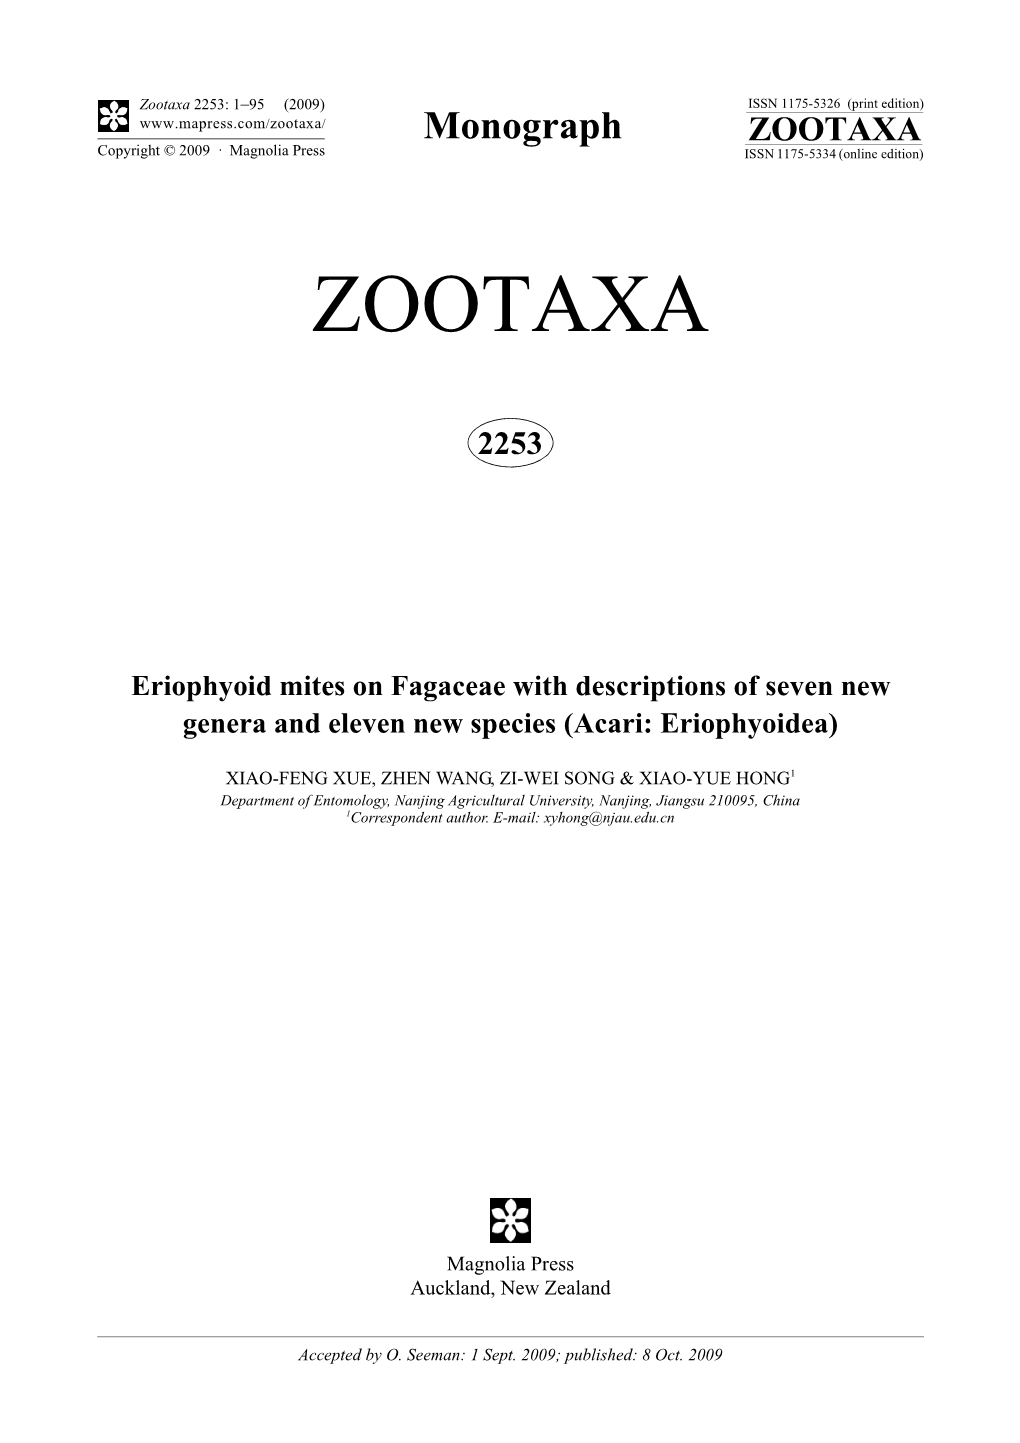 Zootaxa, Eriophyoid Mites on Fagaceae with Descriptions Of